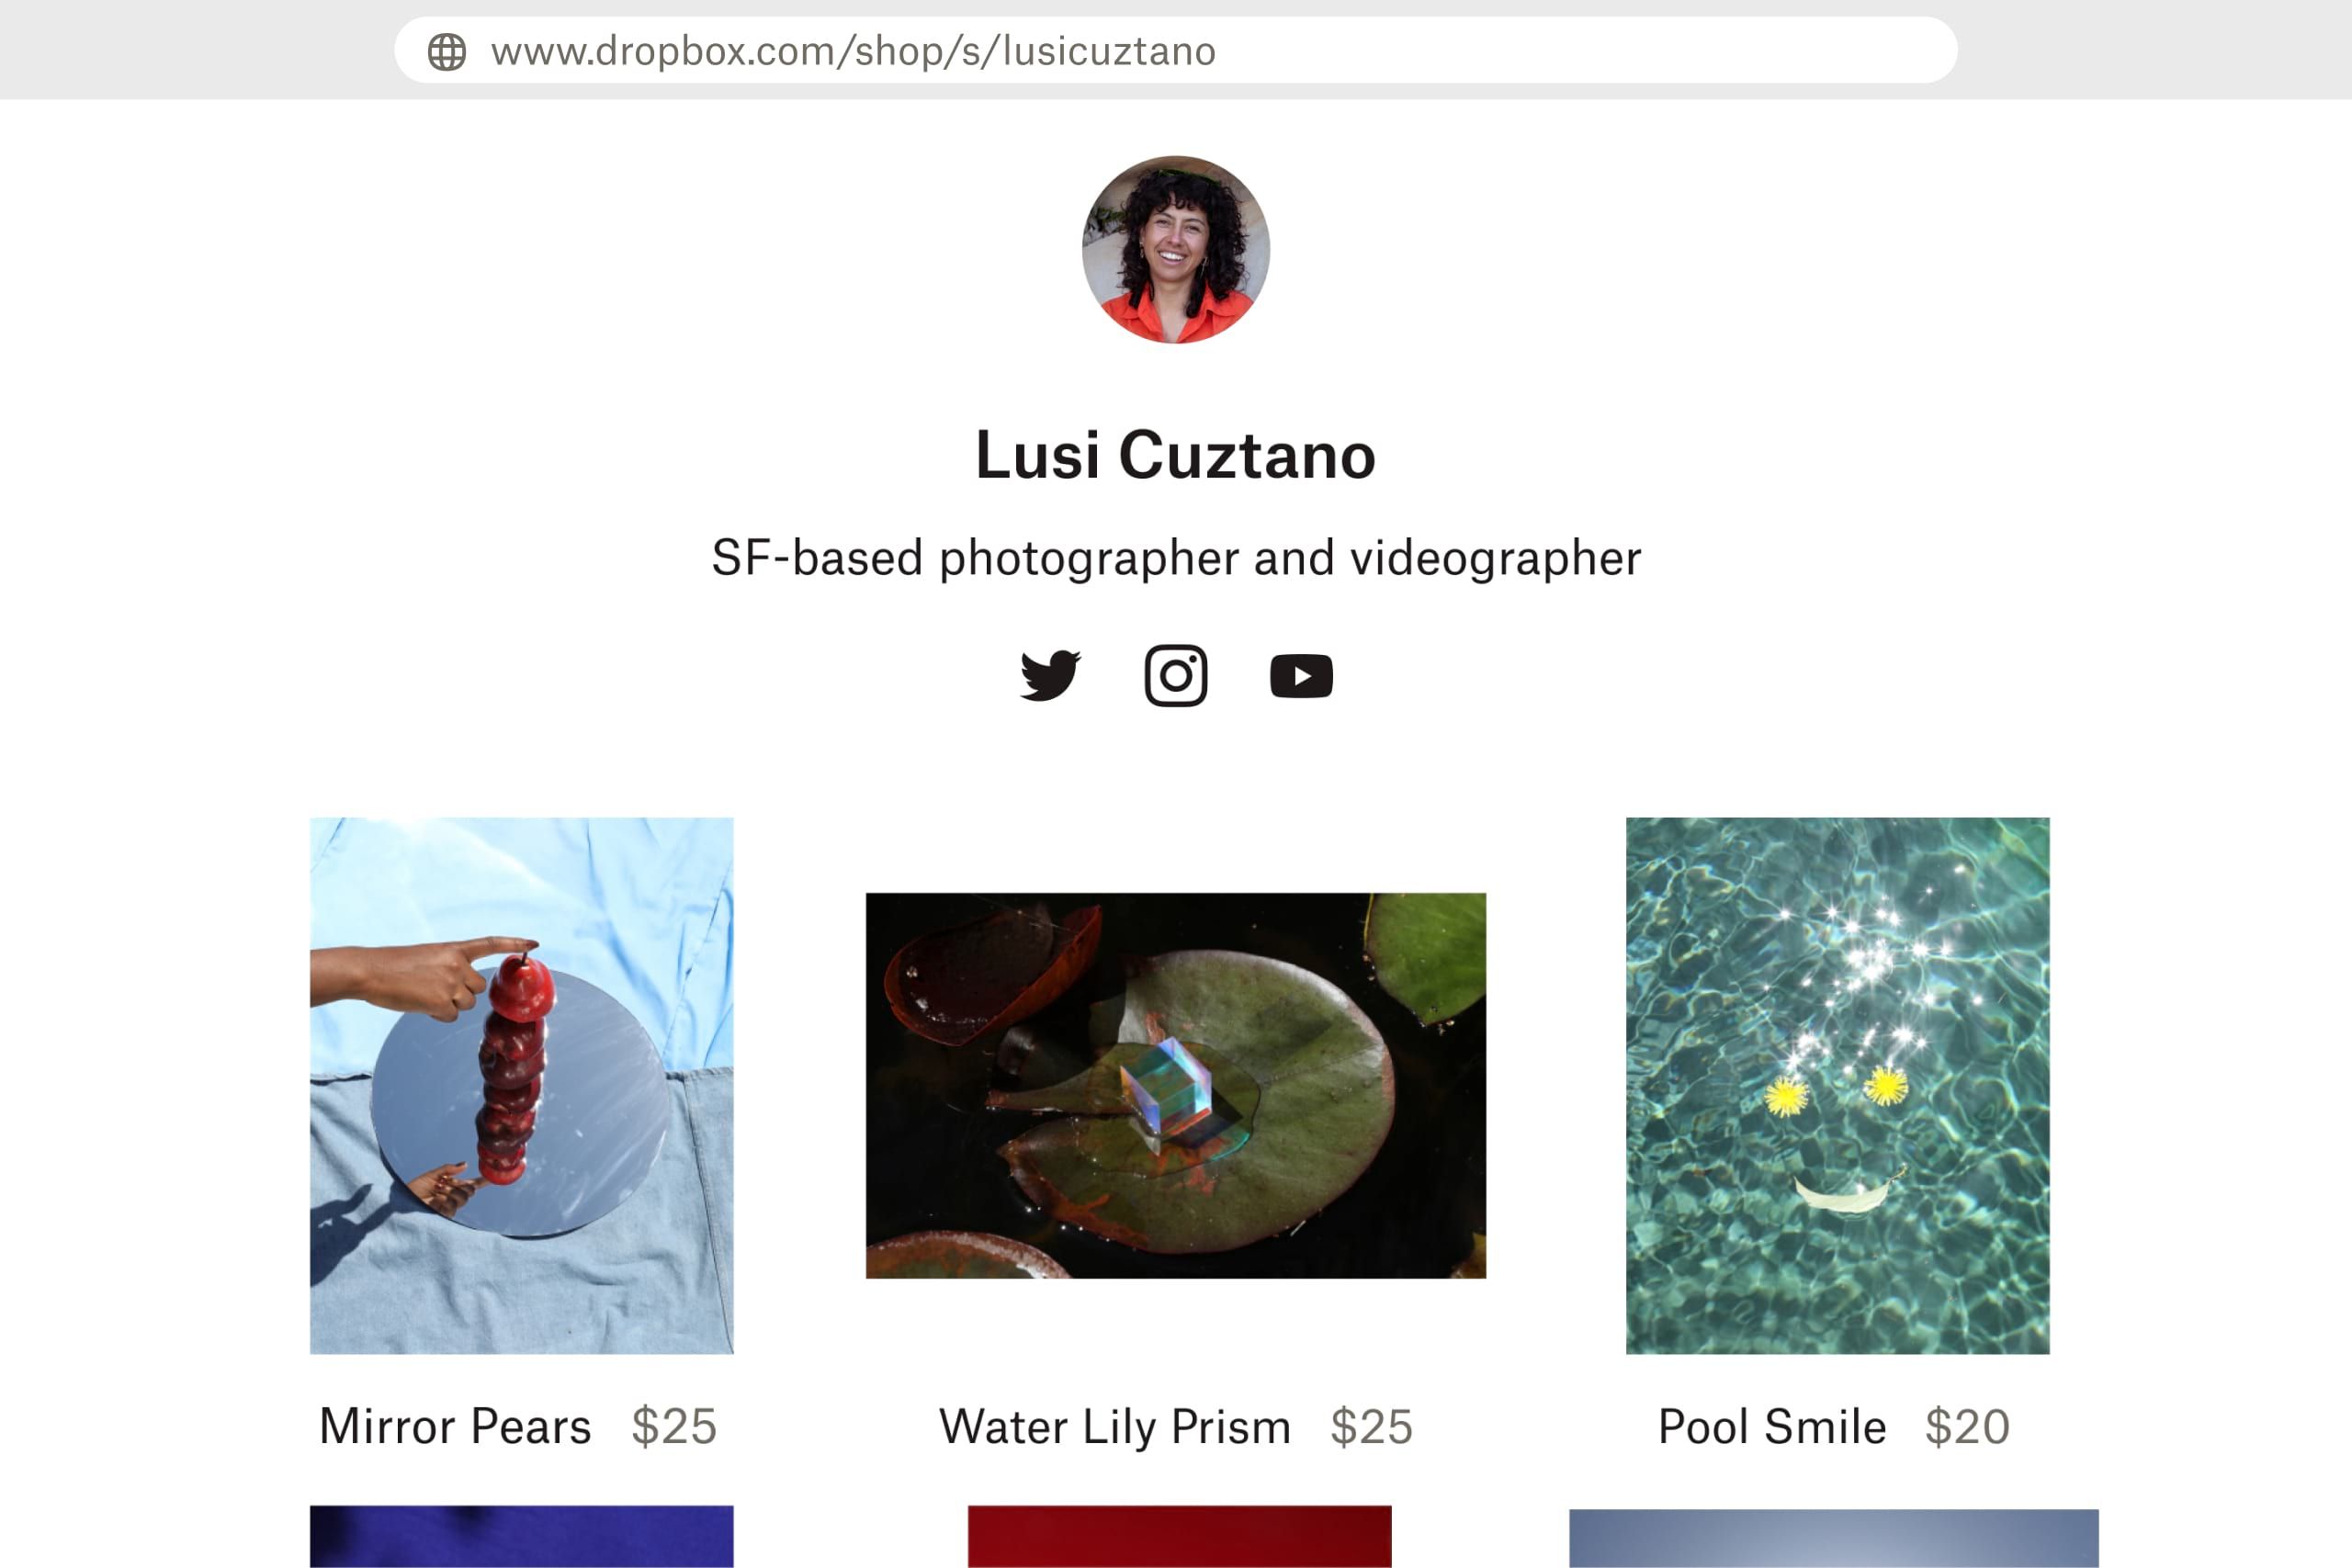 A webpage for a photographer that includes her profile picture as well as a photo of a red pear on a mirror, a photo of a lilly pad, and a photo of flowers in water, all of which are listed for sale